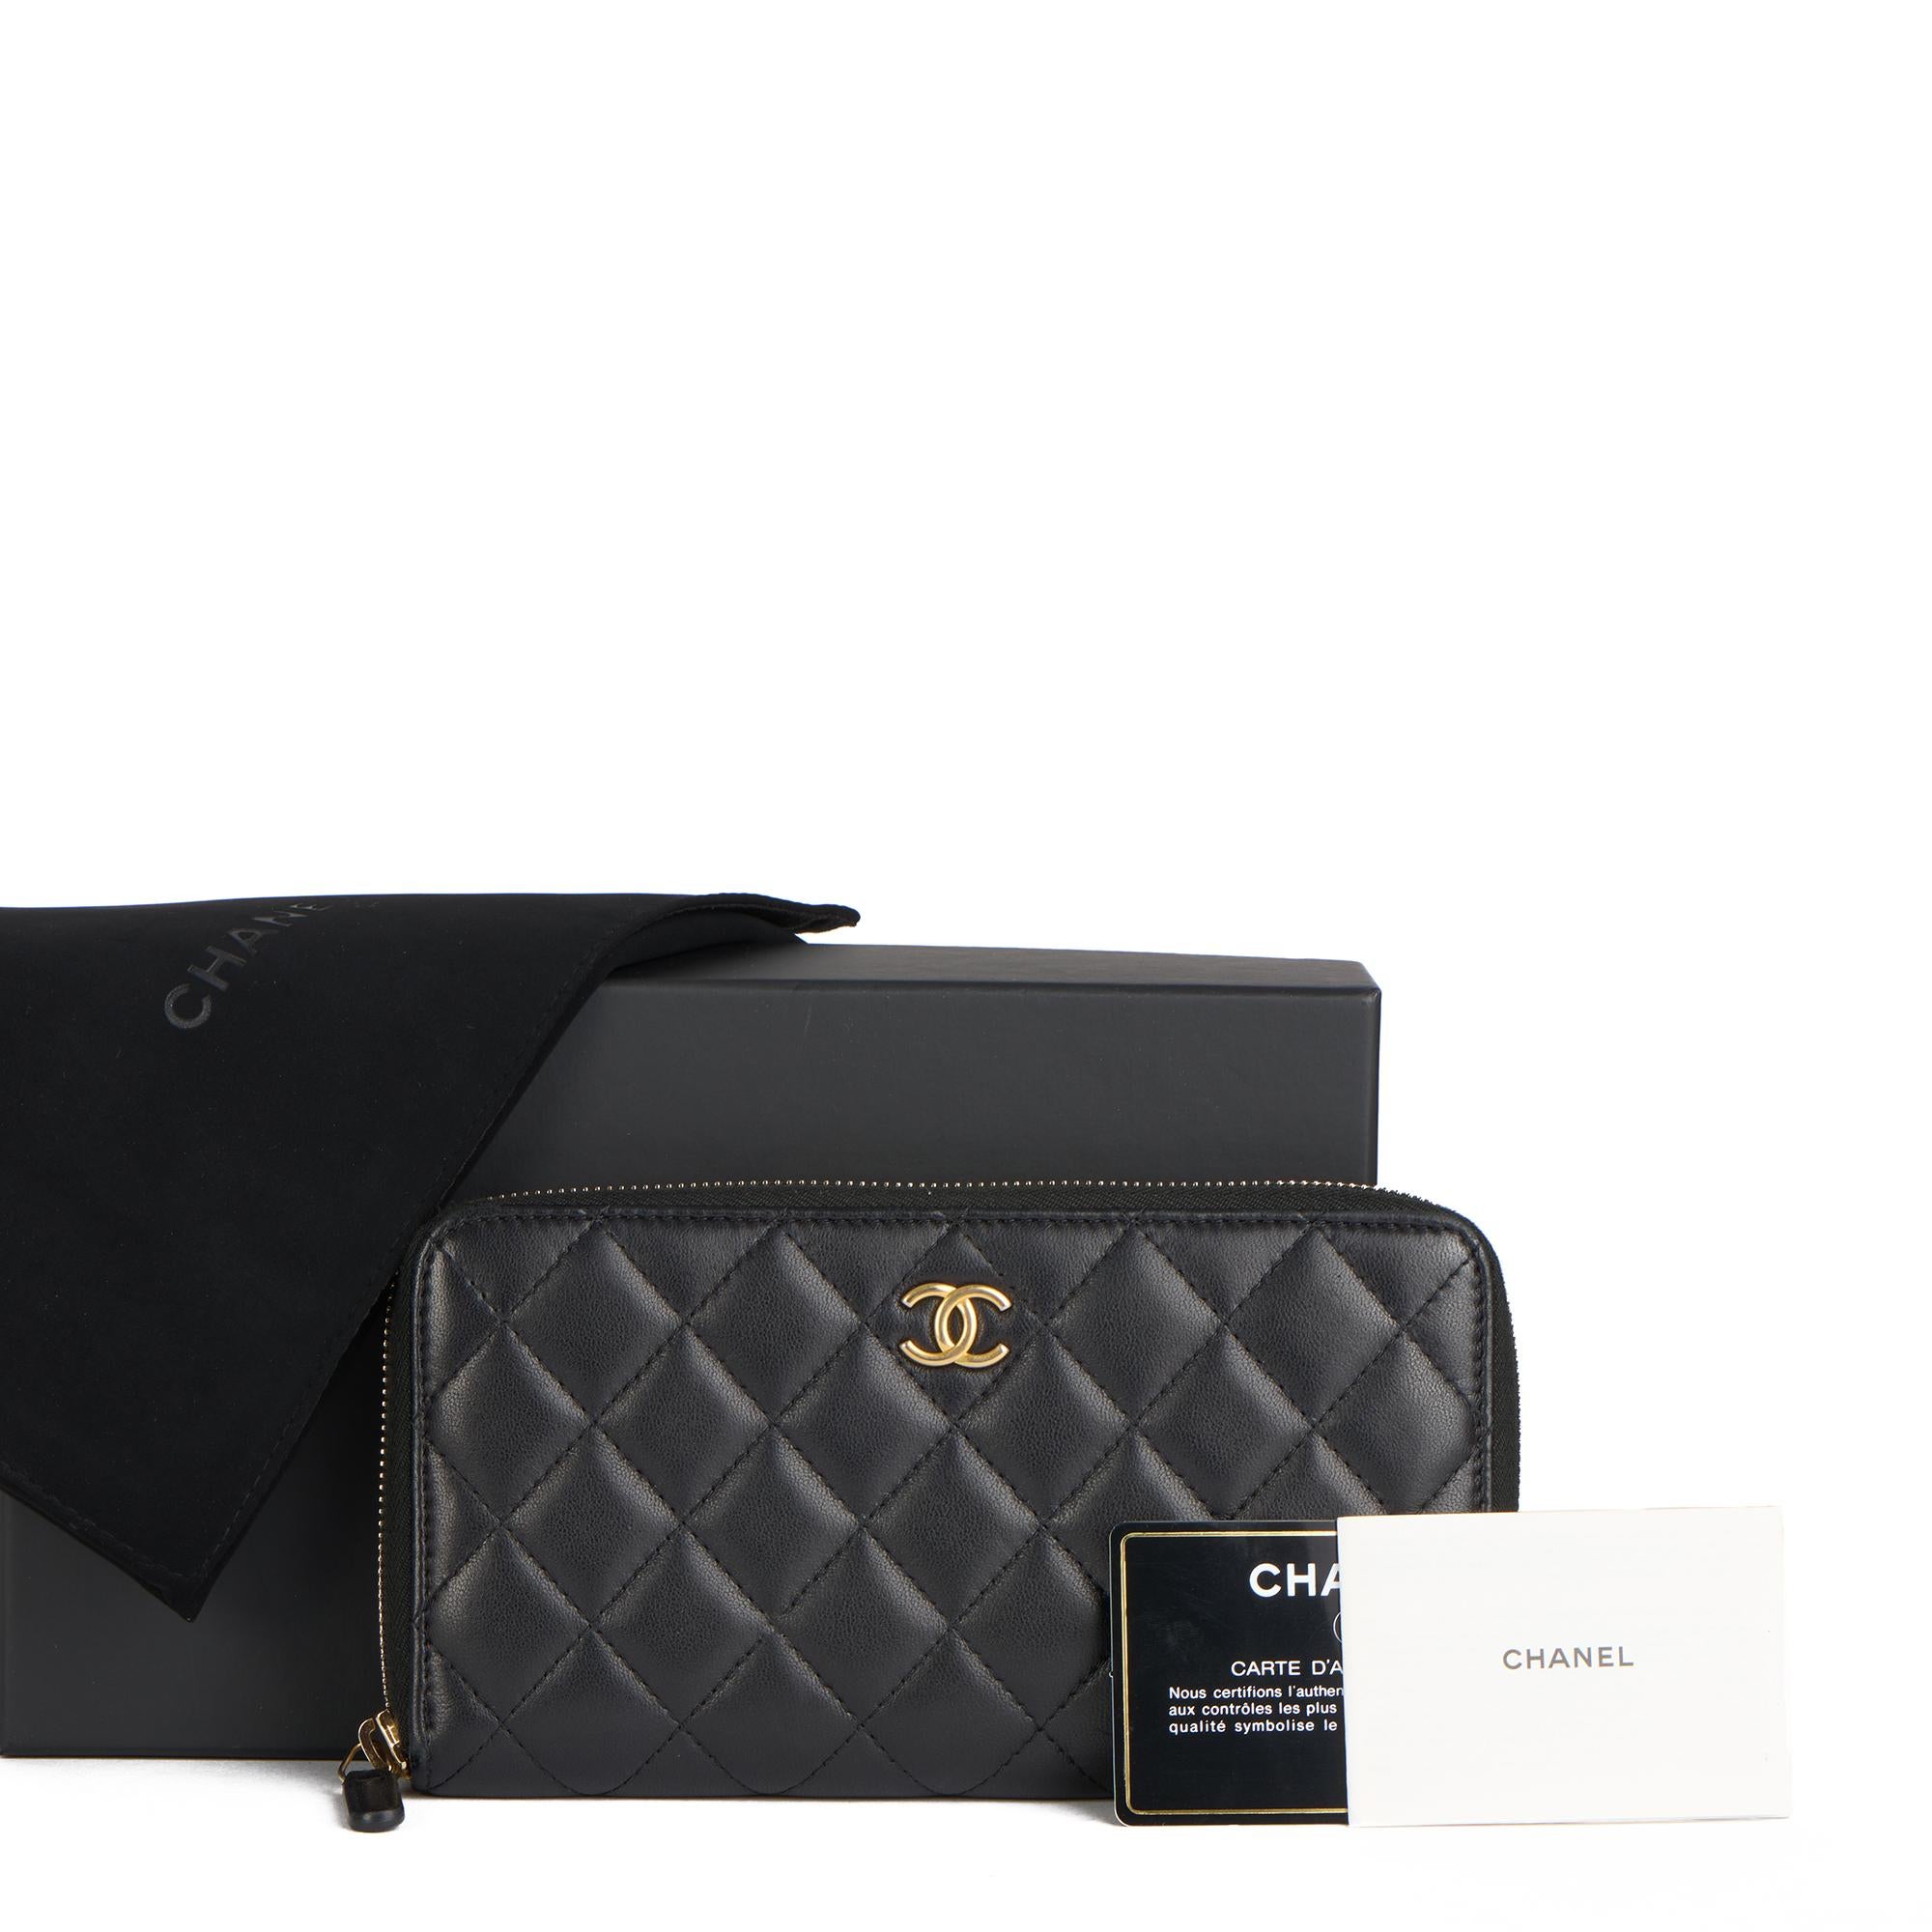 2019 Chanel Black Quilted Lambskin Classic Long Zipped Wallet 6